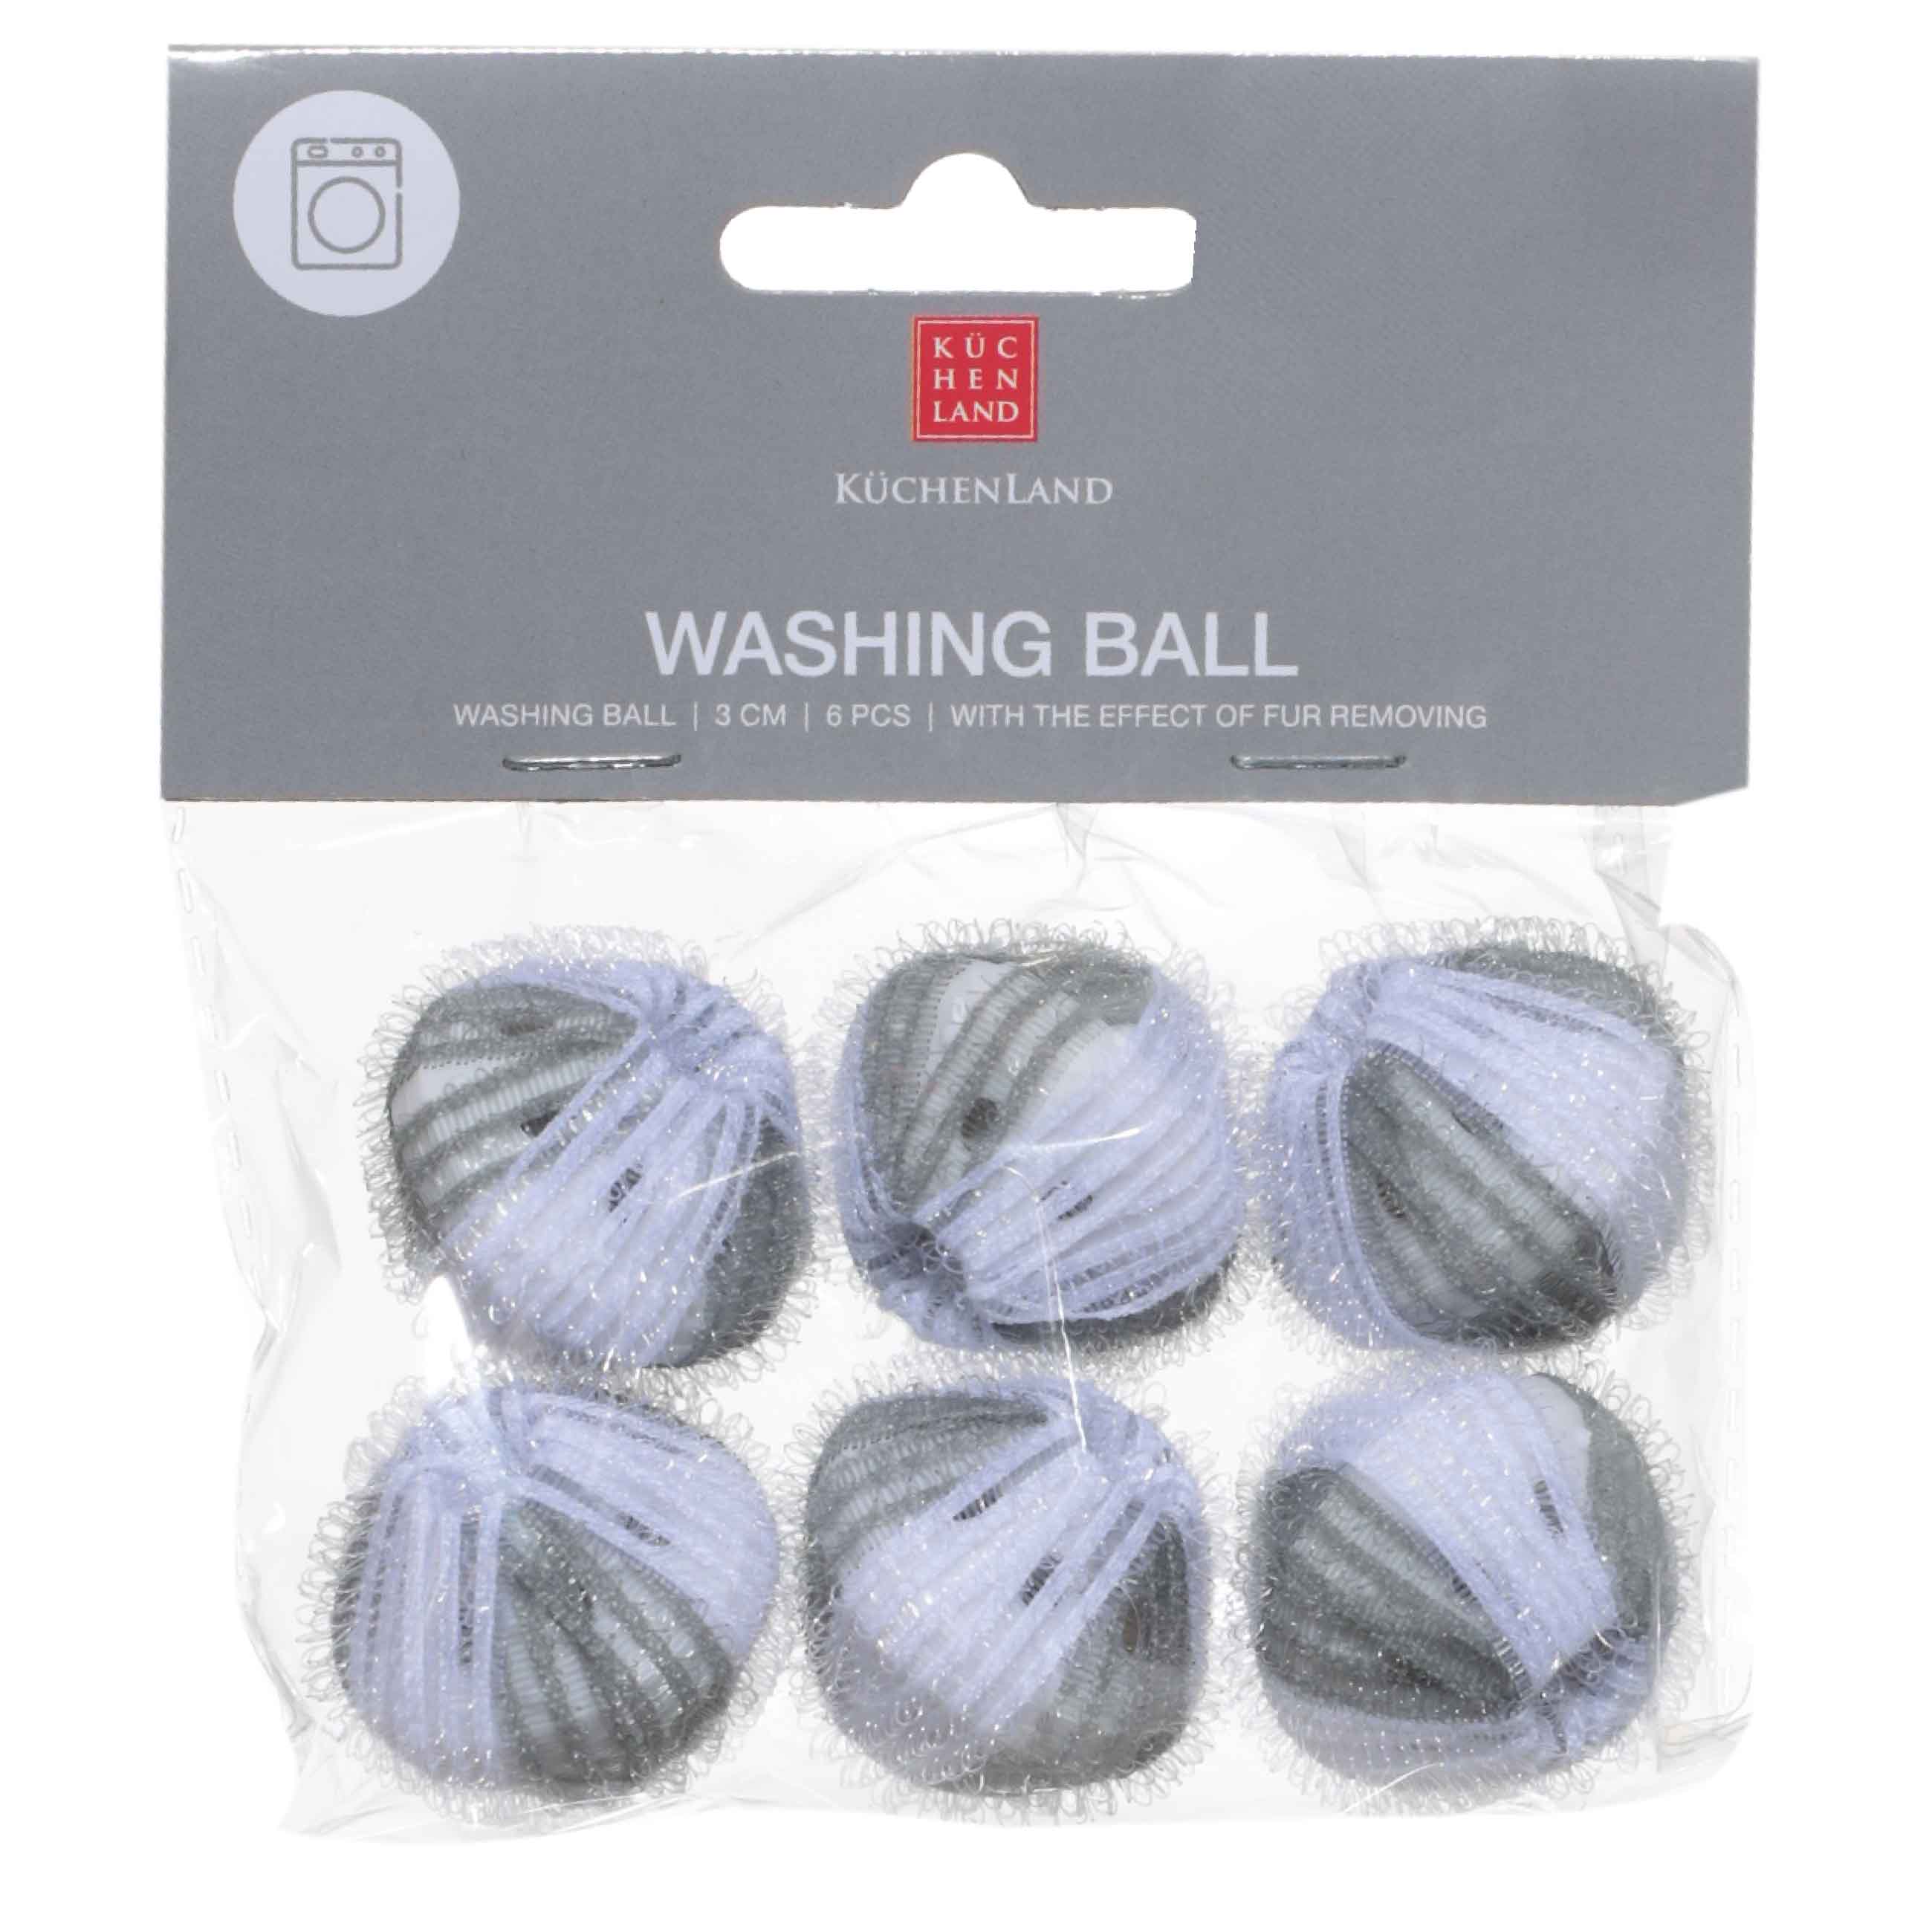 Washing ball, 3 cm, 6 pcs, with the effect of collecting wool, nylon, gray, Washing ball изображение № 2